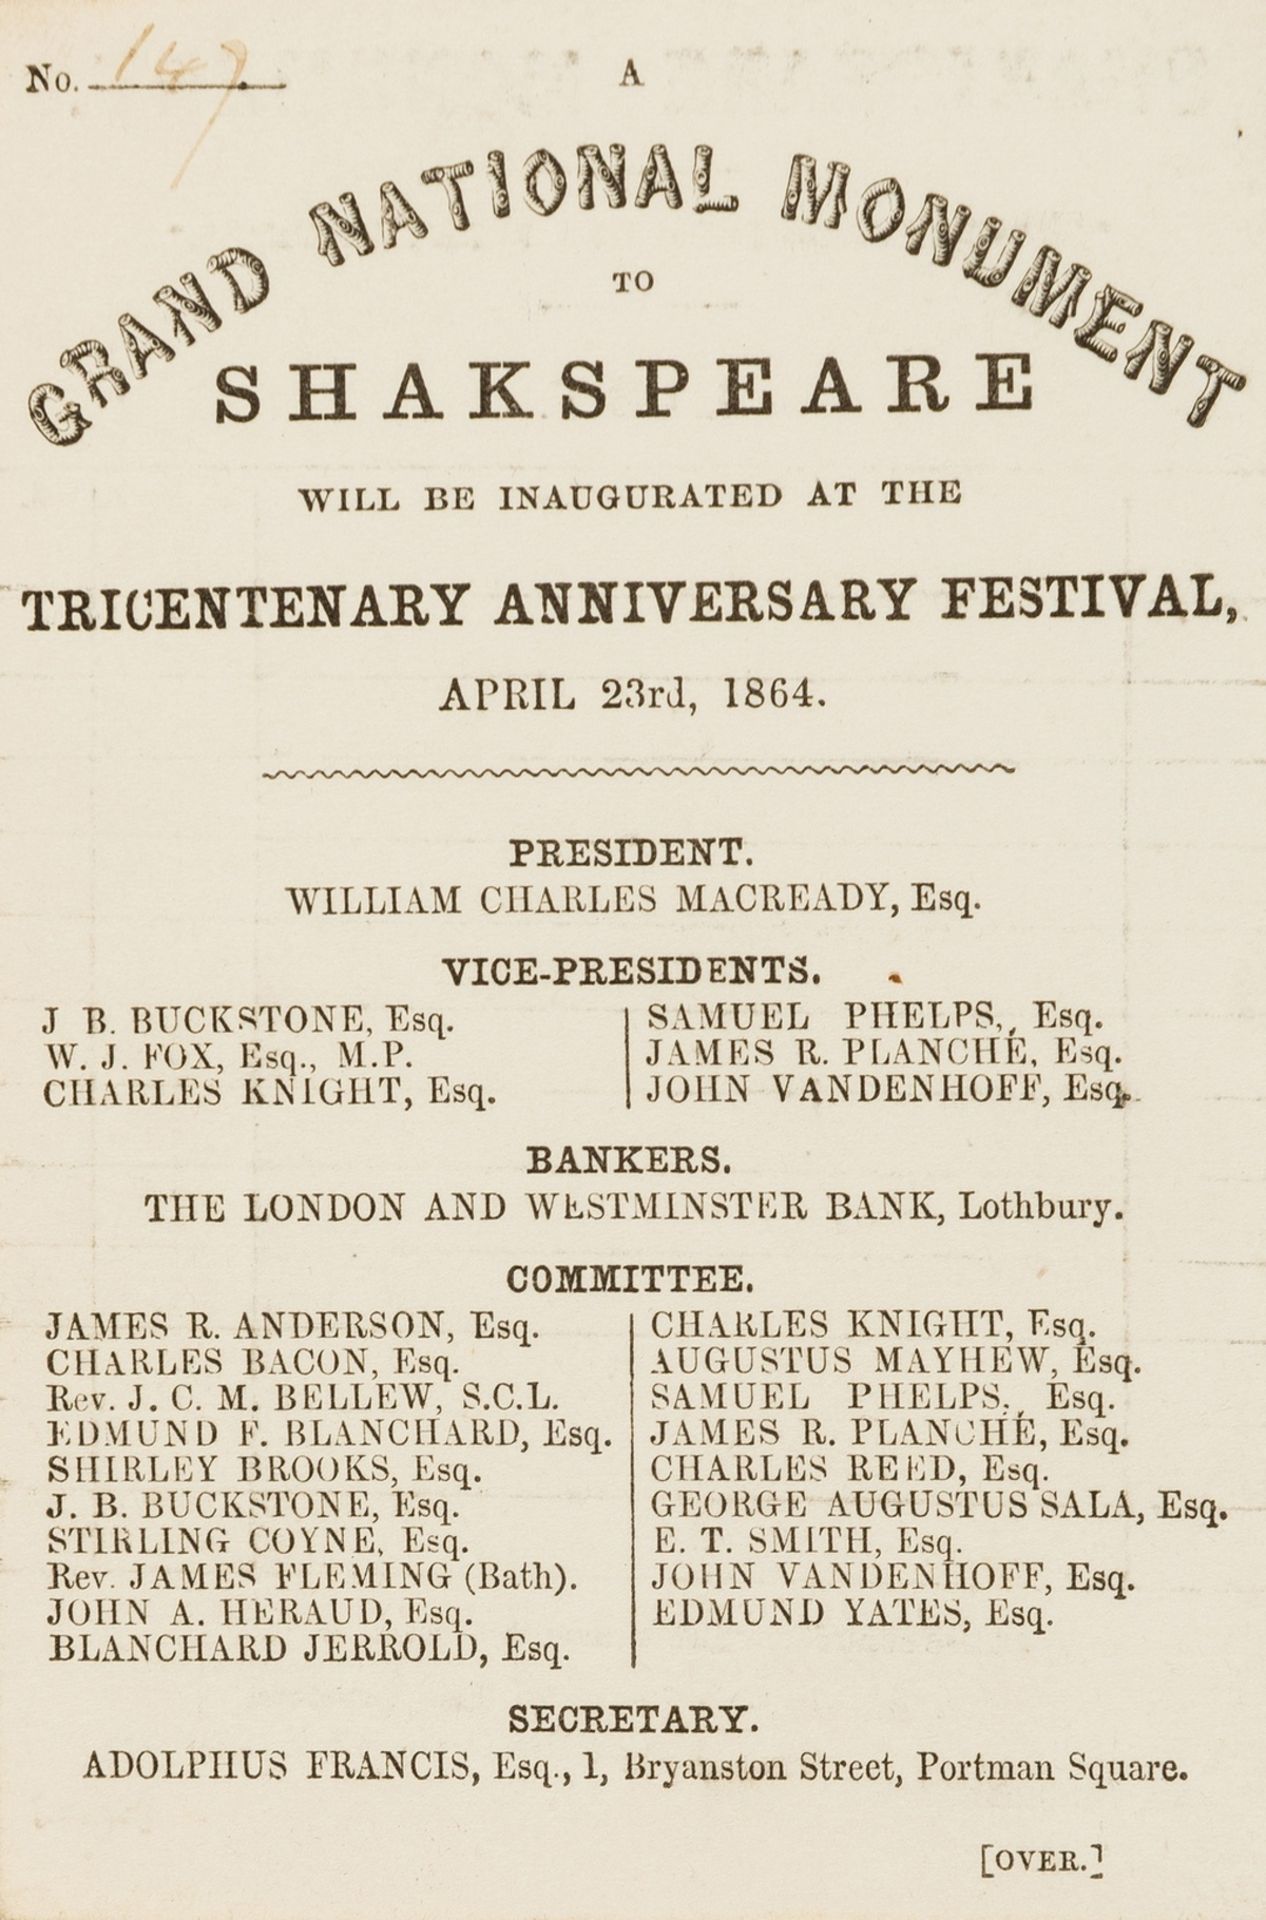 Shakespeare Tricentenary.- [Subscription card] A grand national monument to Shakspeare will be …